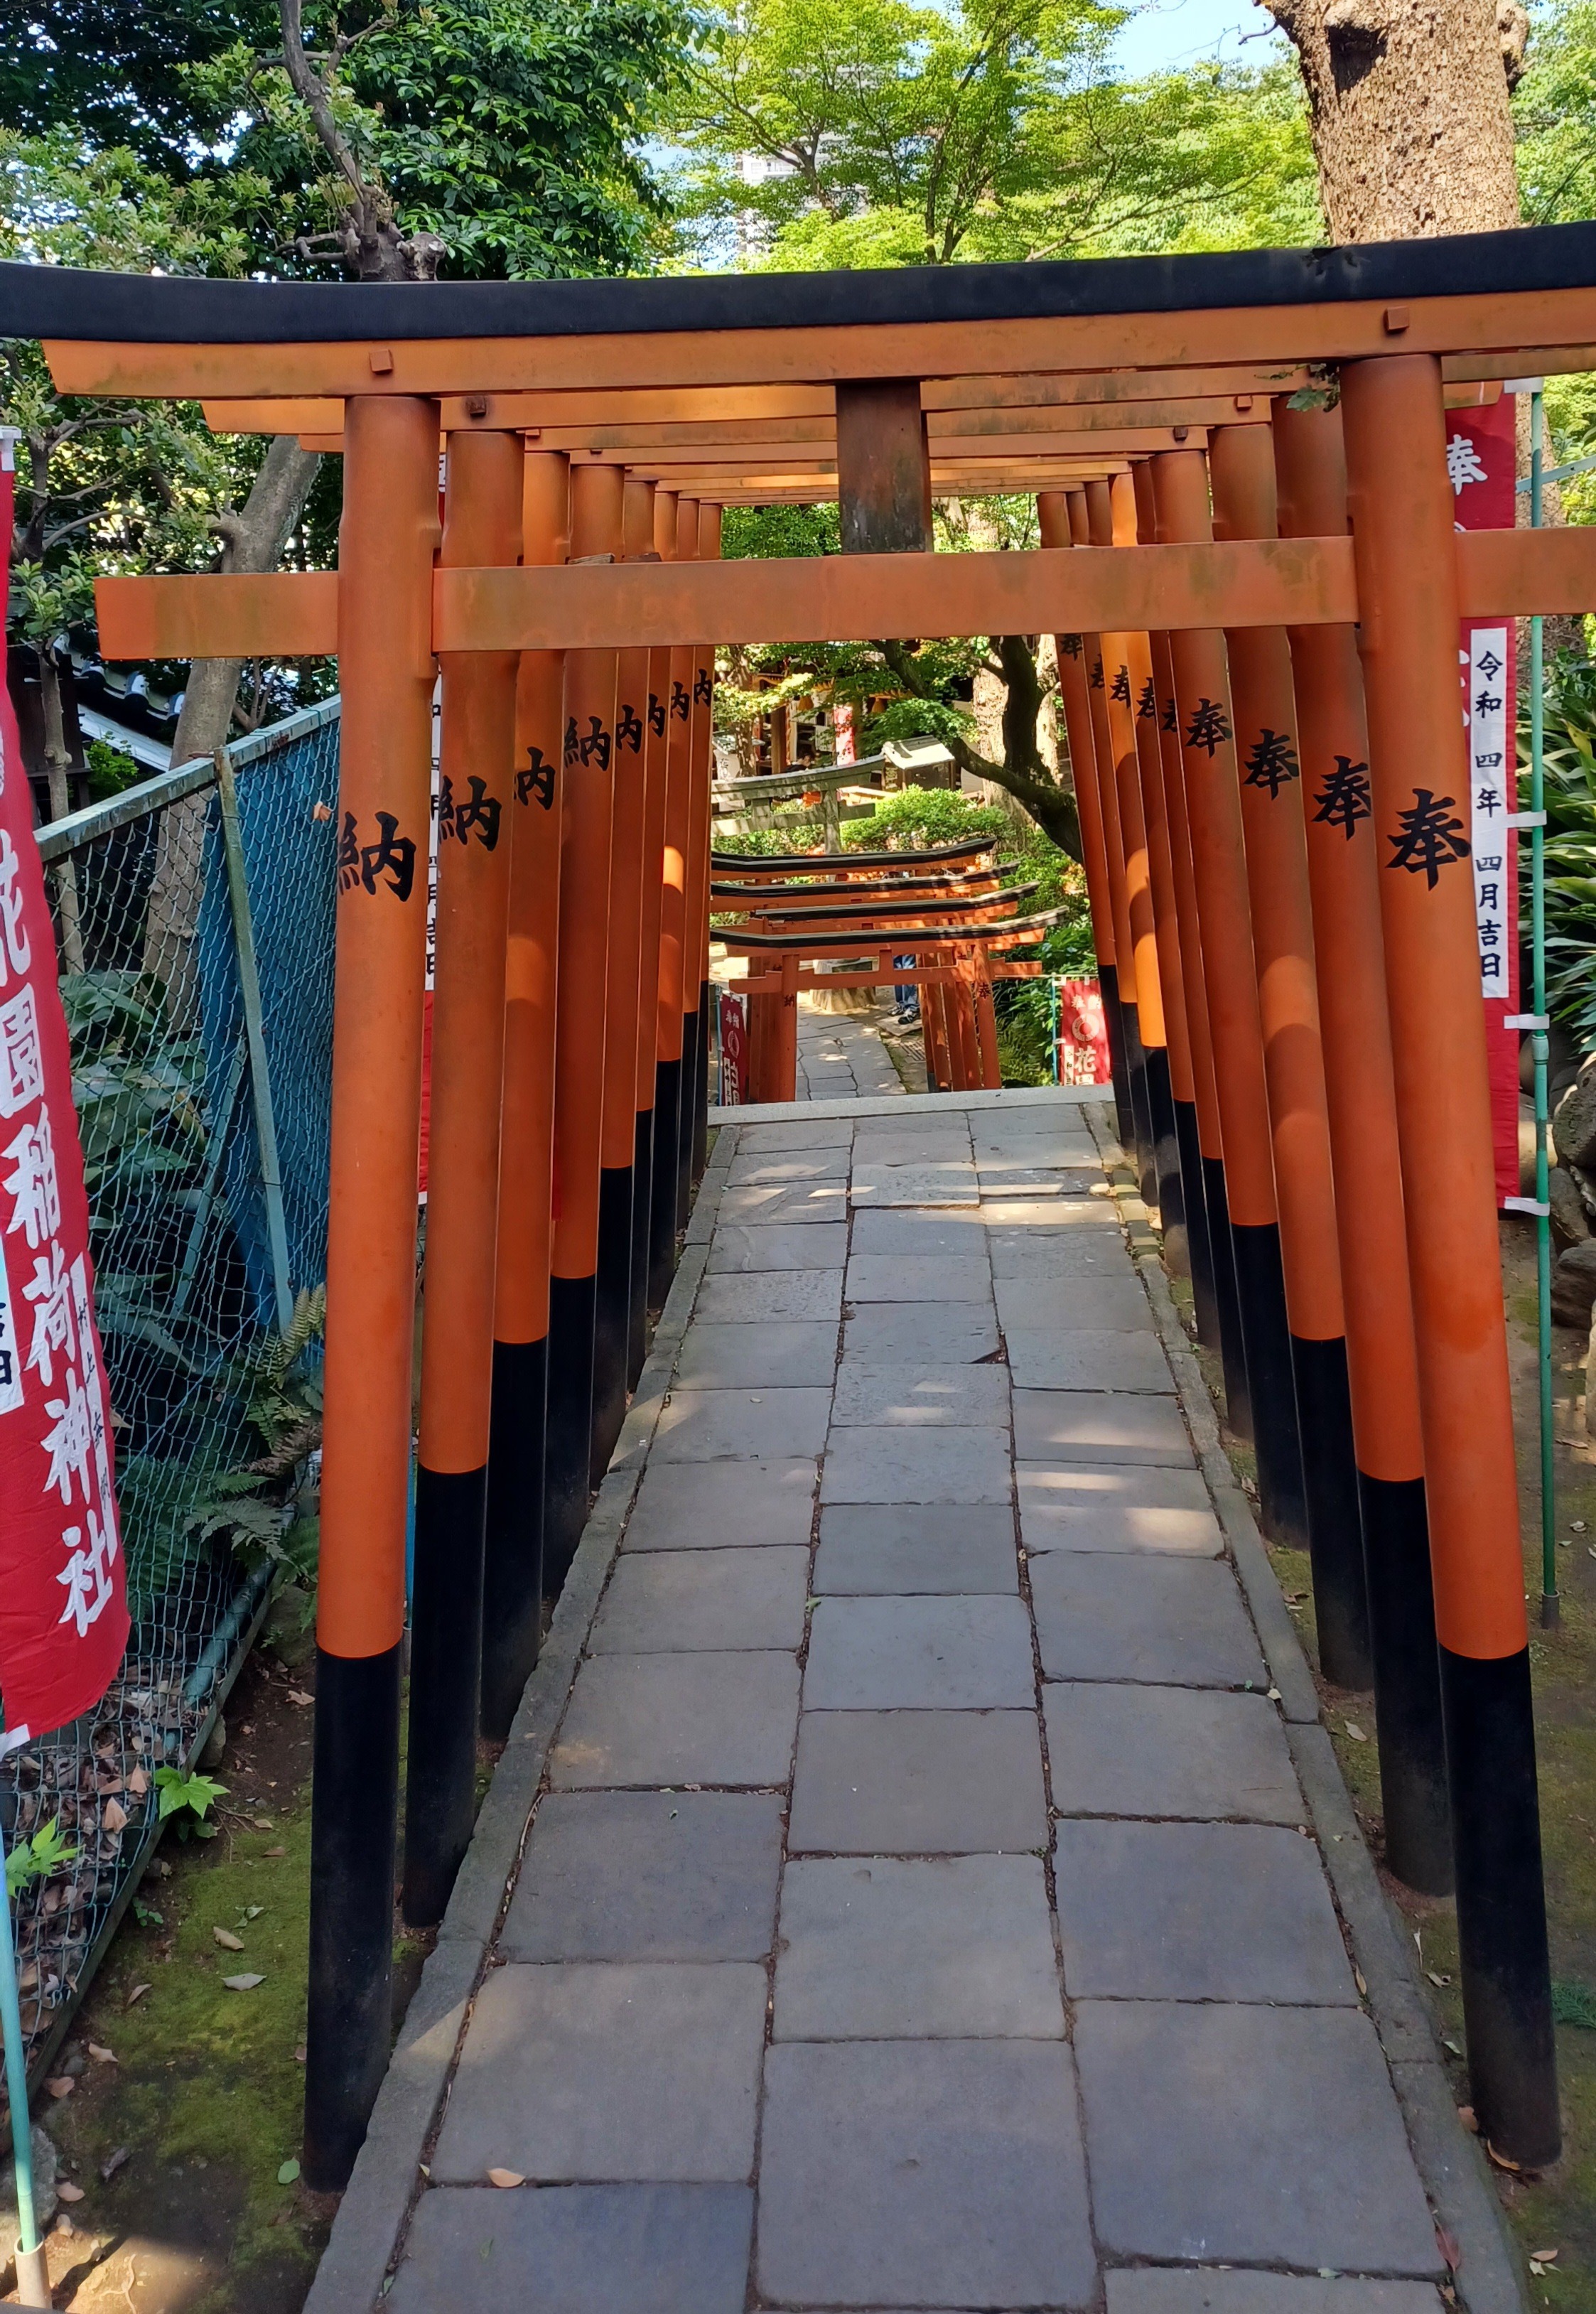 A tunnel of orange/red torii gates with a black Japanese symbol written on each one.